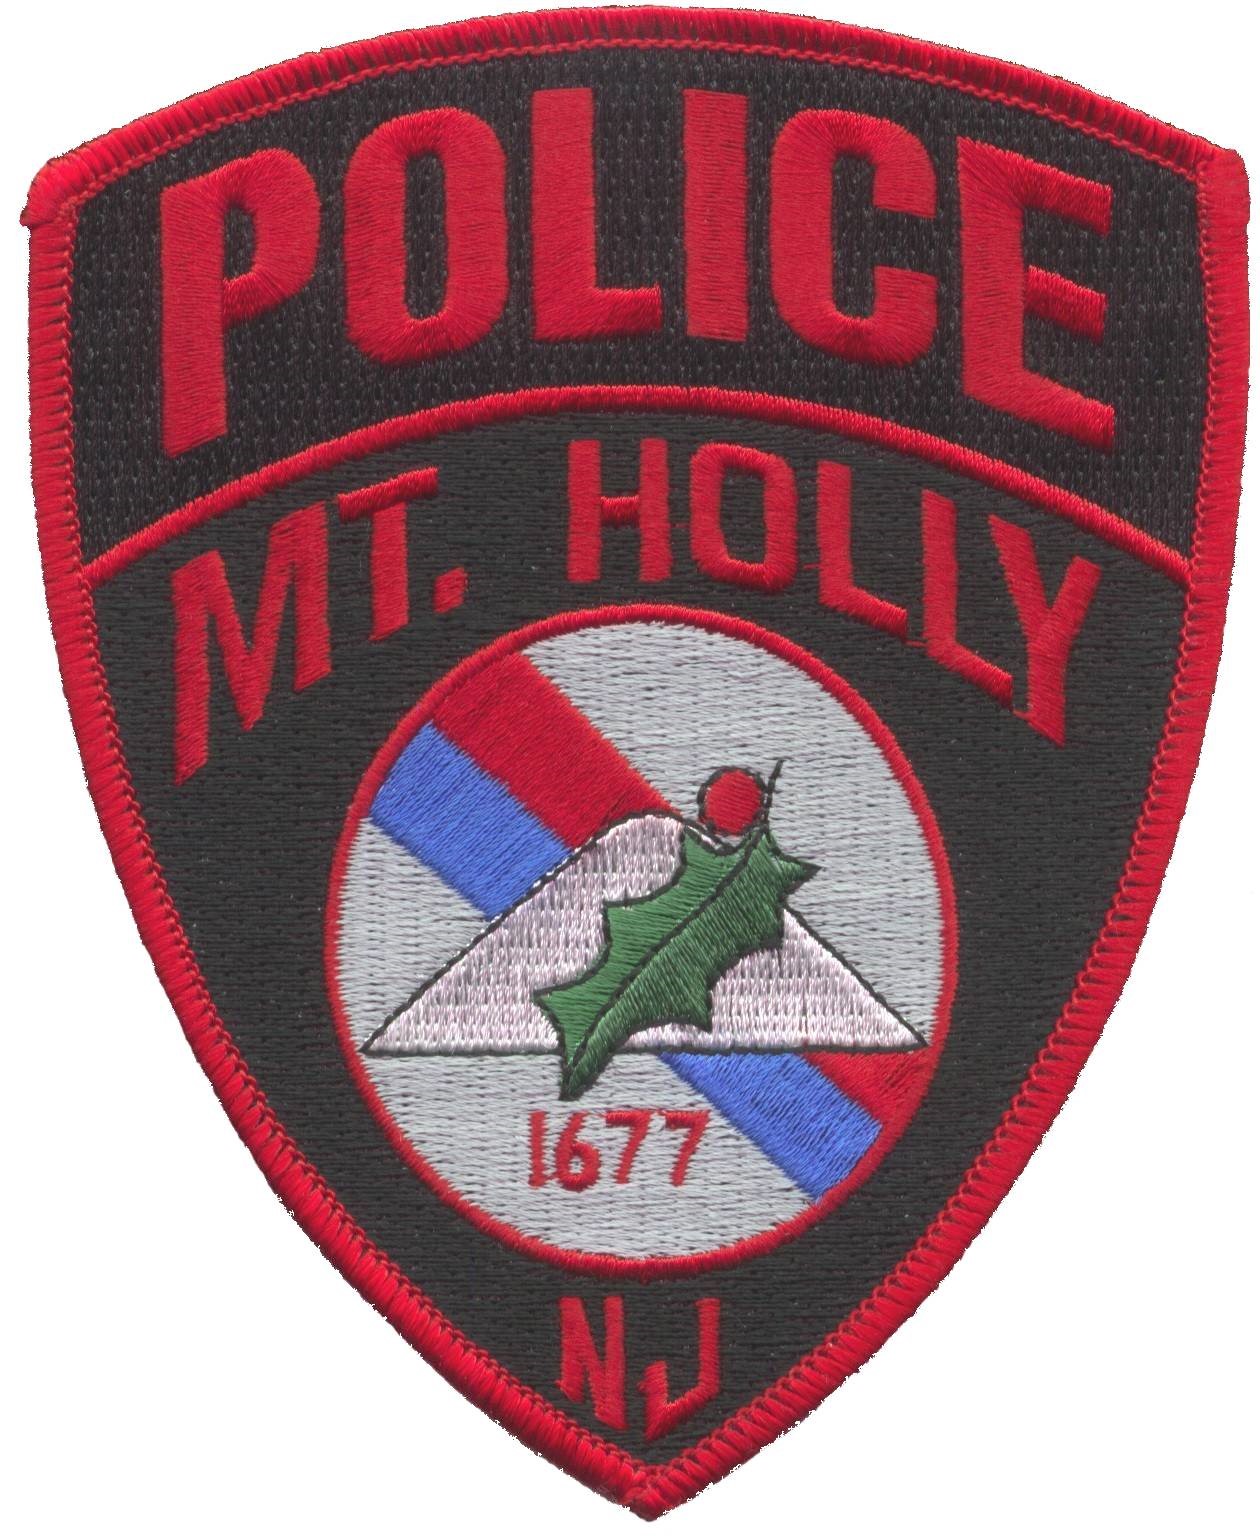 Mount Holly Police Department, NJ Police Jobs